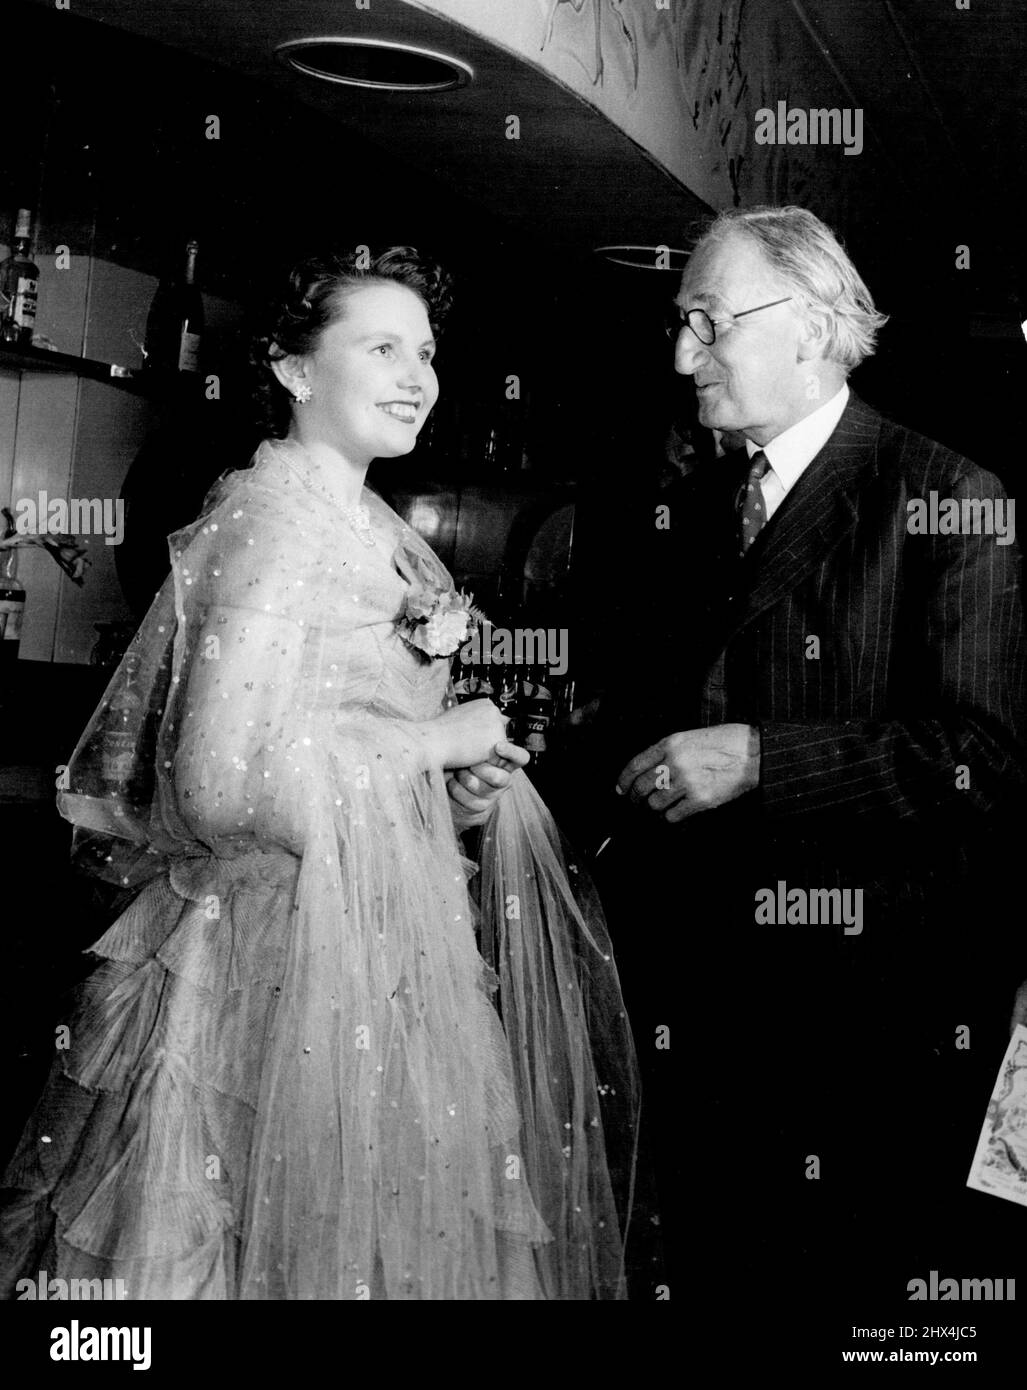 Textile Queen Comes to Town. Before the curtain rose on 'Tough at the Top' at the Adelphi, Muriel met the co-playwright. Mr. A.P. Herbert, M.P. July 12, 1951. (Photo by The Central Office Of Information, London). Stock Photo